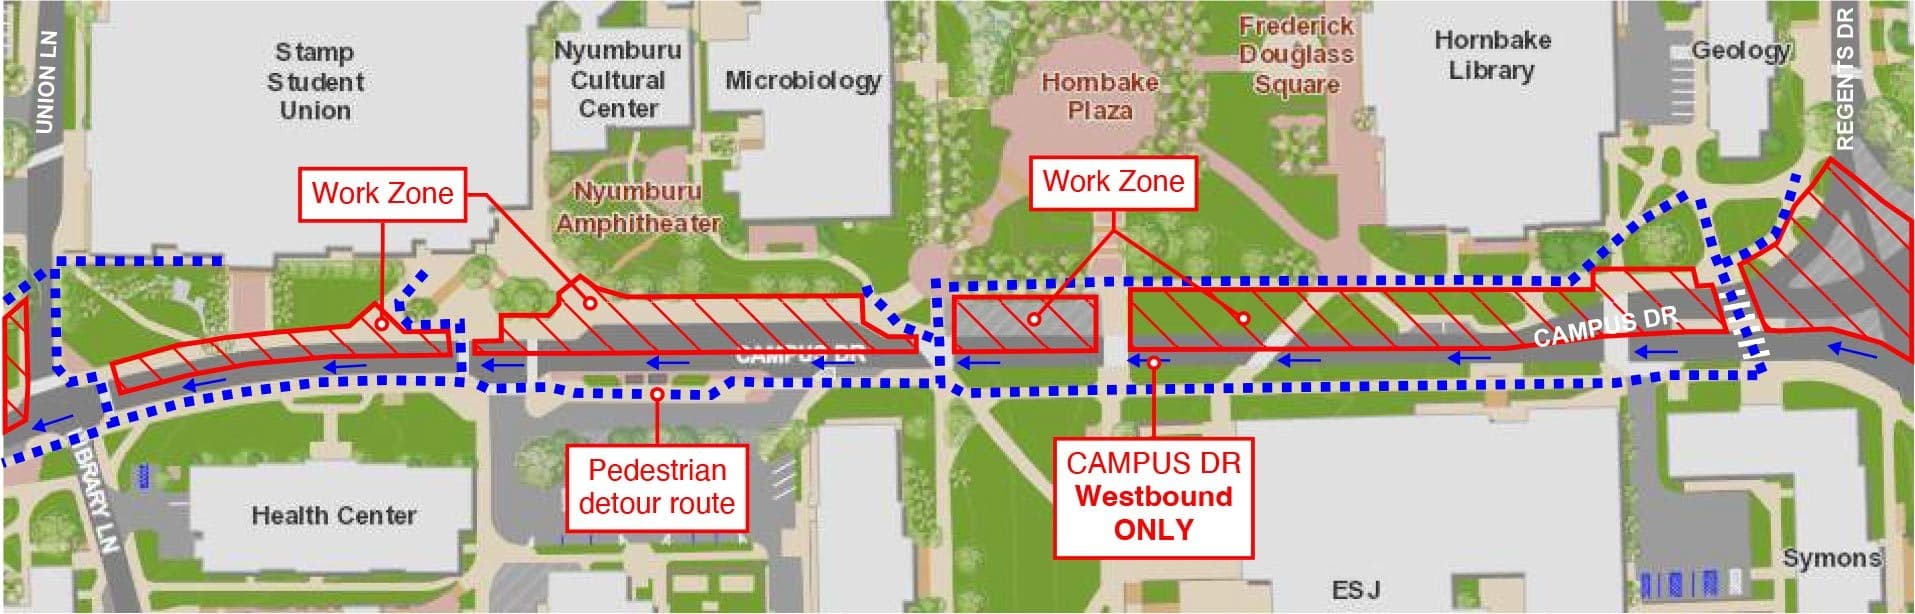 map showing pedestrian detours along Campus Drive through the center of campus